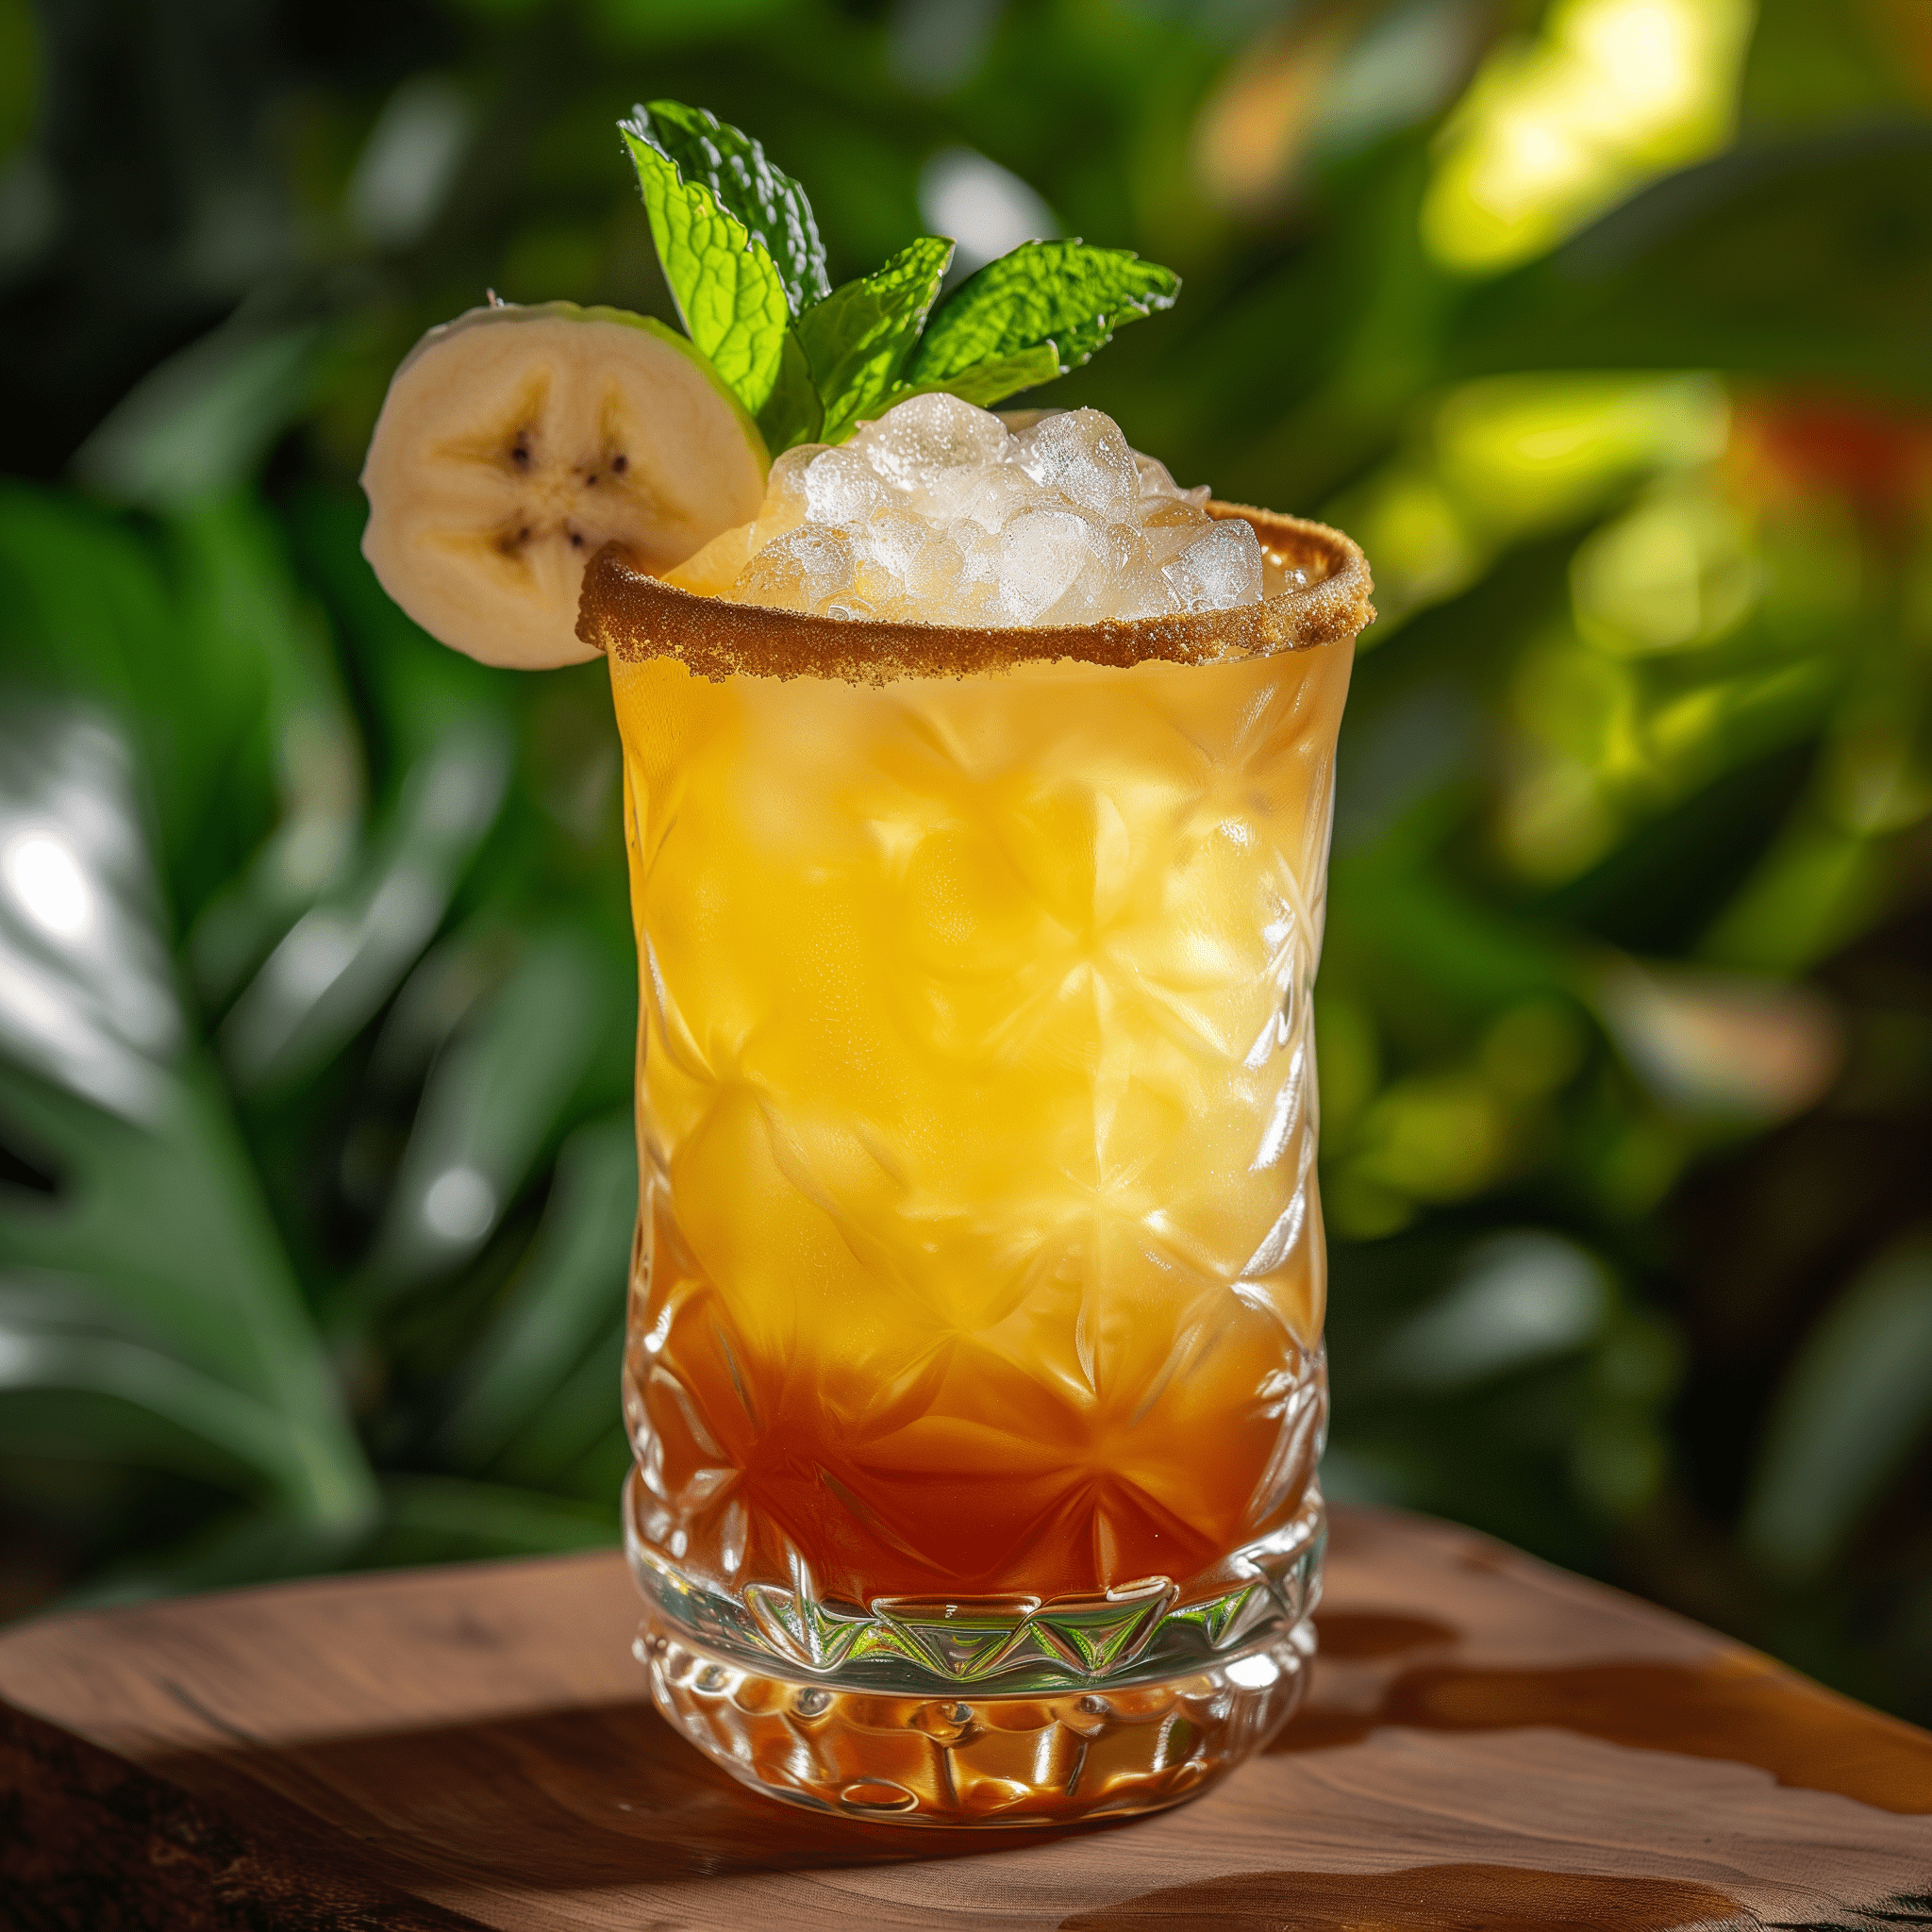 Banana Mai Tai Cocktail Recipe - The Banana Mai Tai is a harmonious blend of sweet and tangy flavors with a robust rum undertone. The banana liqueur adds a creamy, fruity note, while the lime juice provides a refreshing citrus kick. The orgeat syrup and orange curaçao round out the sweetness, making it a rich and complex cocktail.